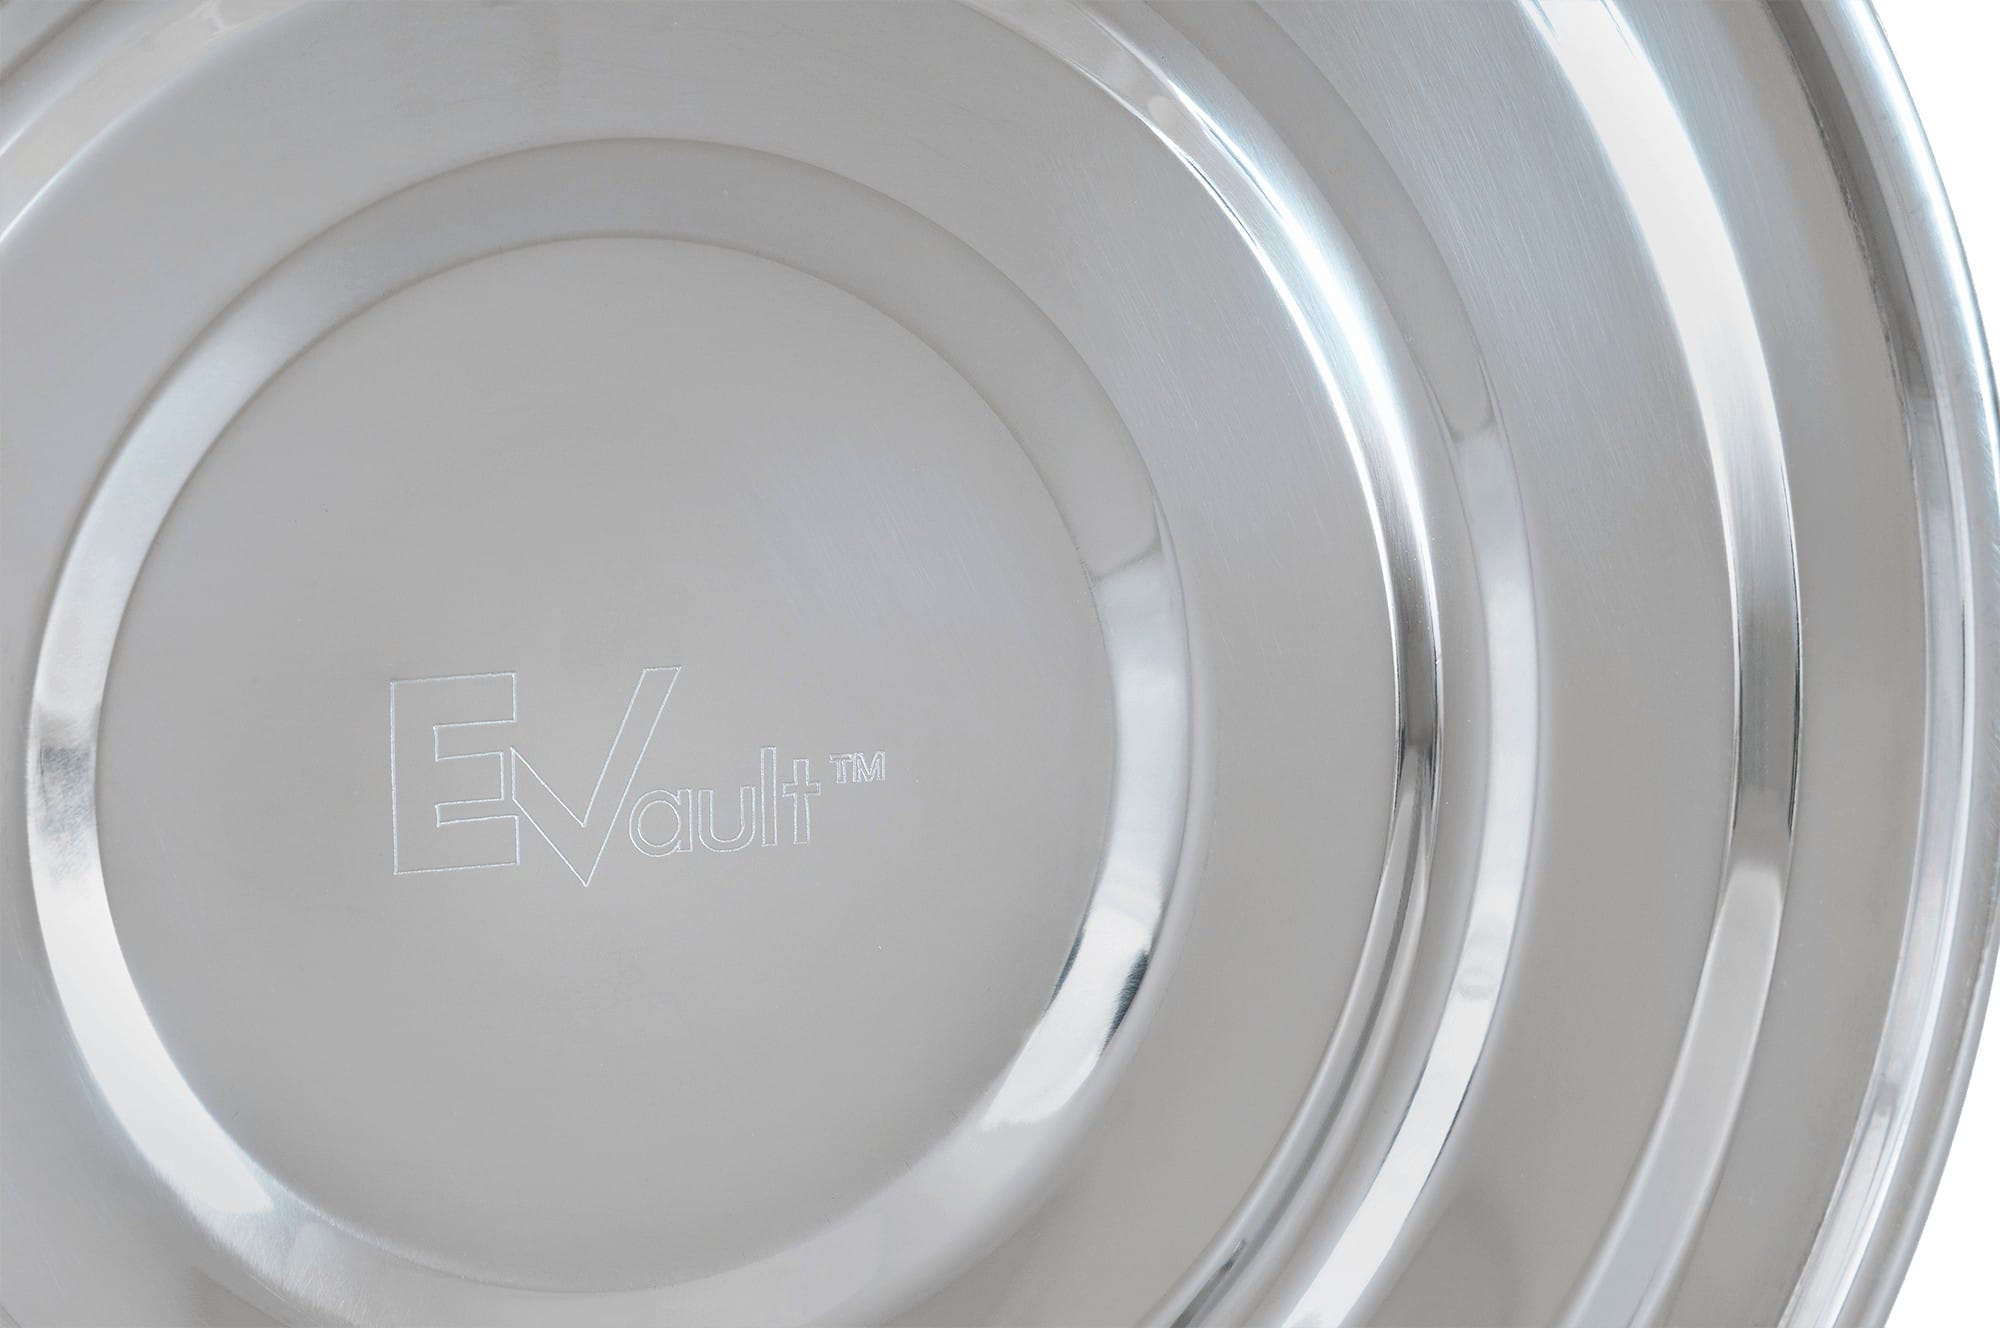 EVault-extract-storage-transportation-containers